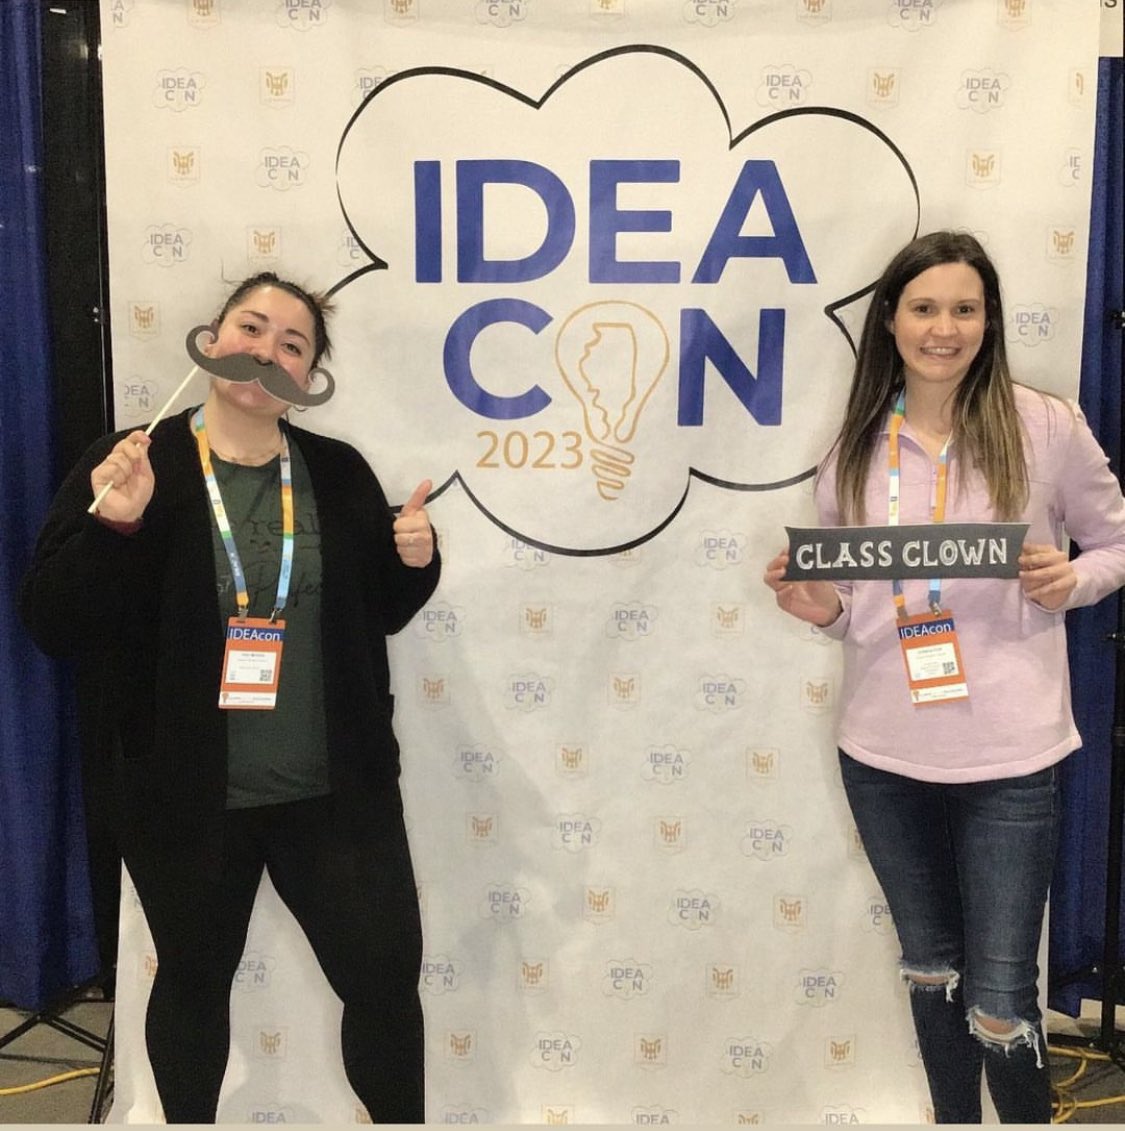 Had a great time at #IDEAcon! A lot of great sessions focused on #gamification #edtechtools #sel #studentledlearning